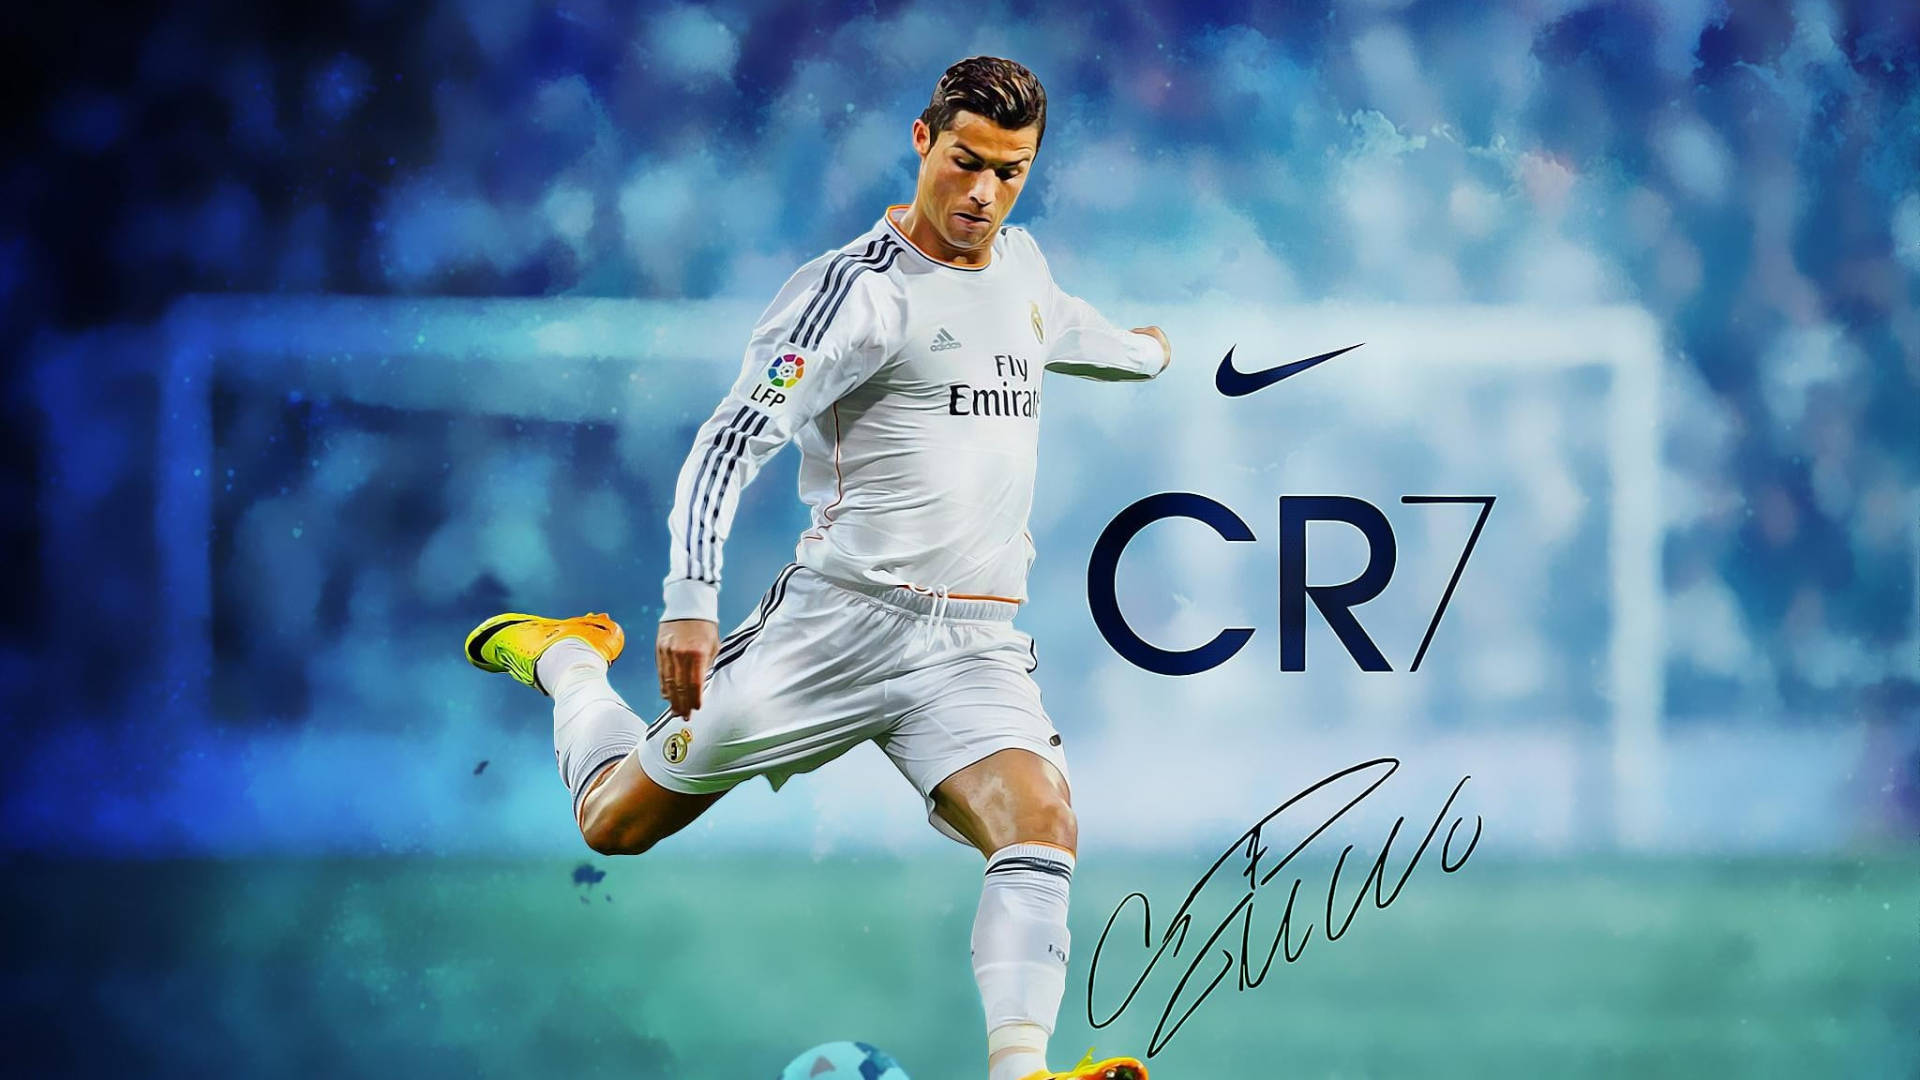 Cr7 Hd Abstract Blue Background